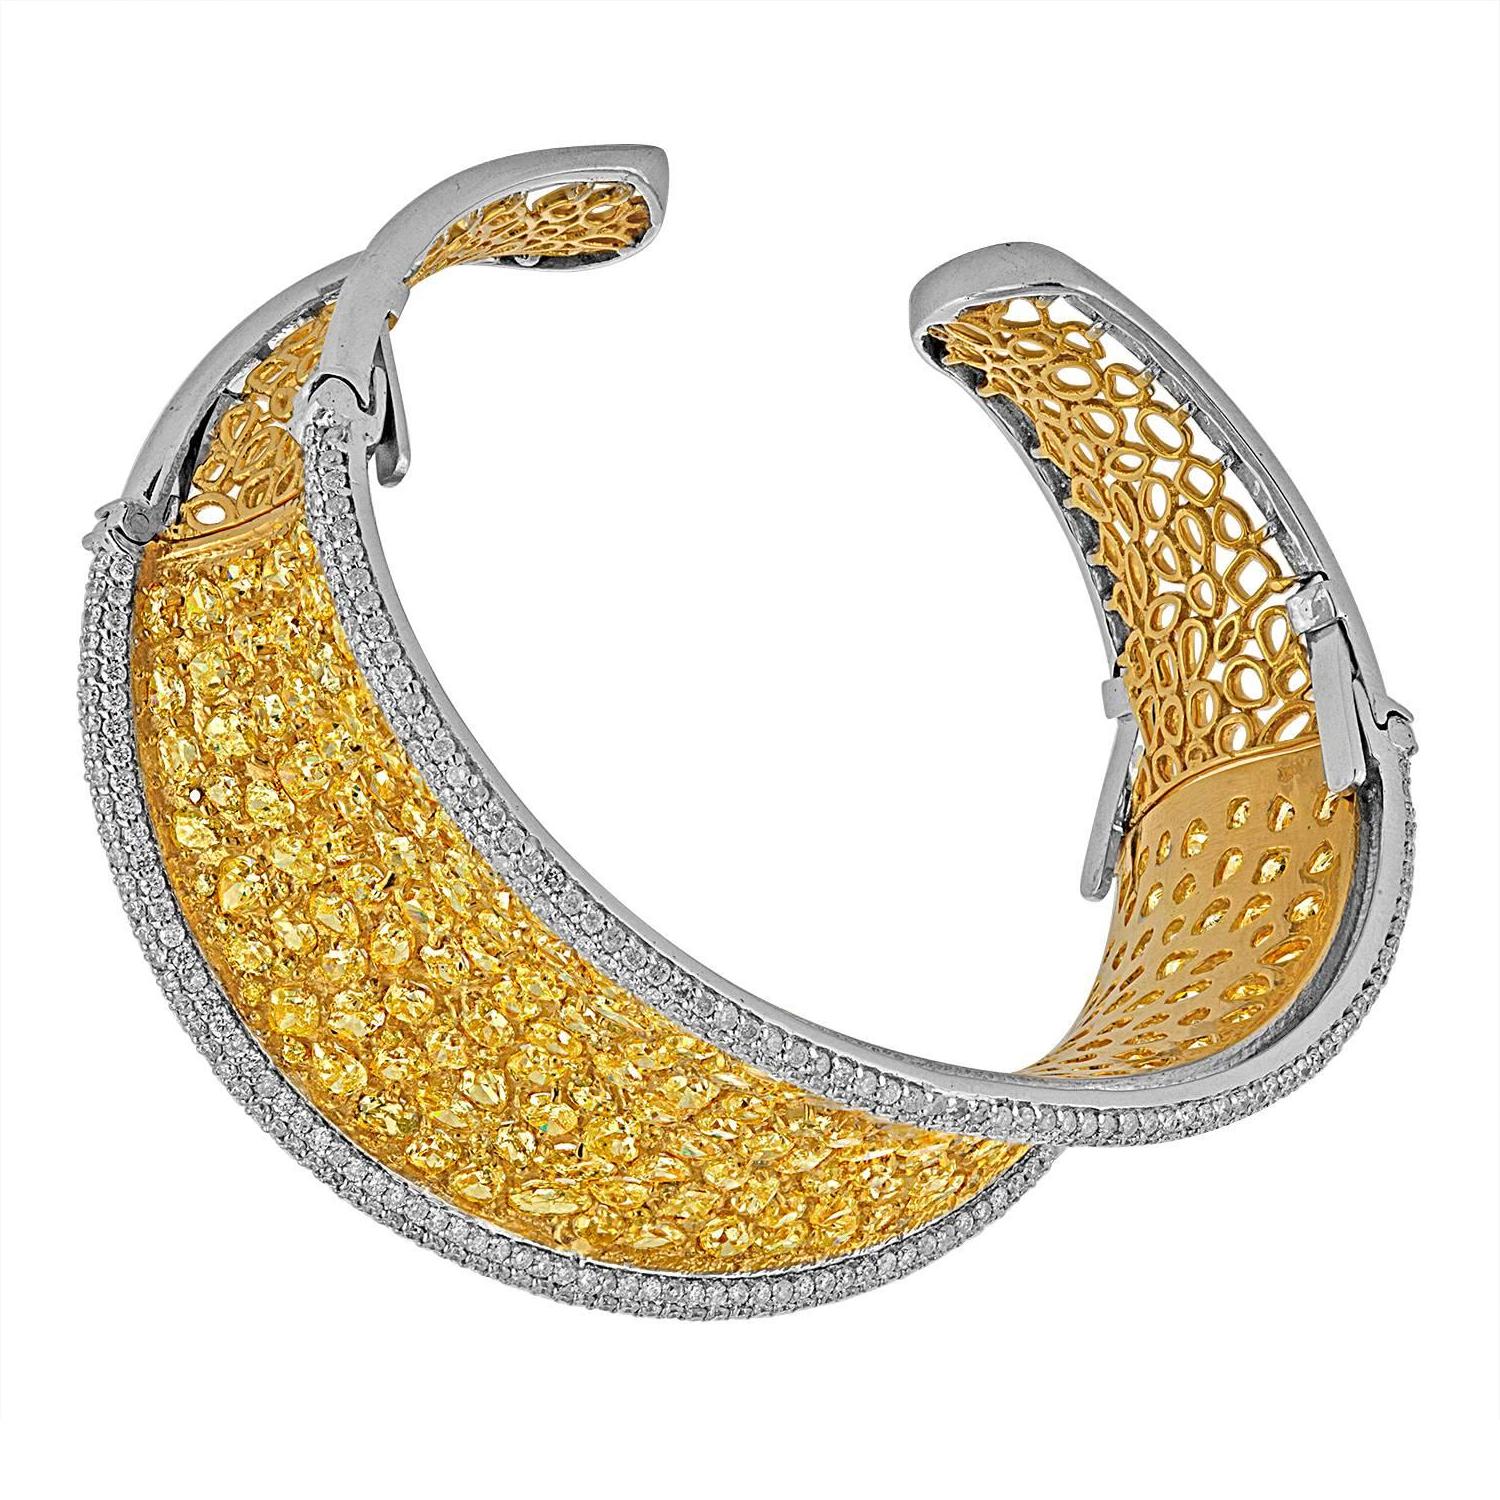 Contemporary Fancy Shaped Yellow and White Diamonds set in Two Color Gold Bangle Bracelet